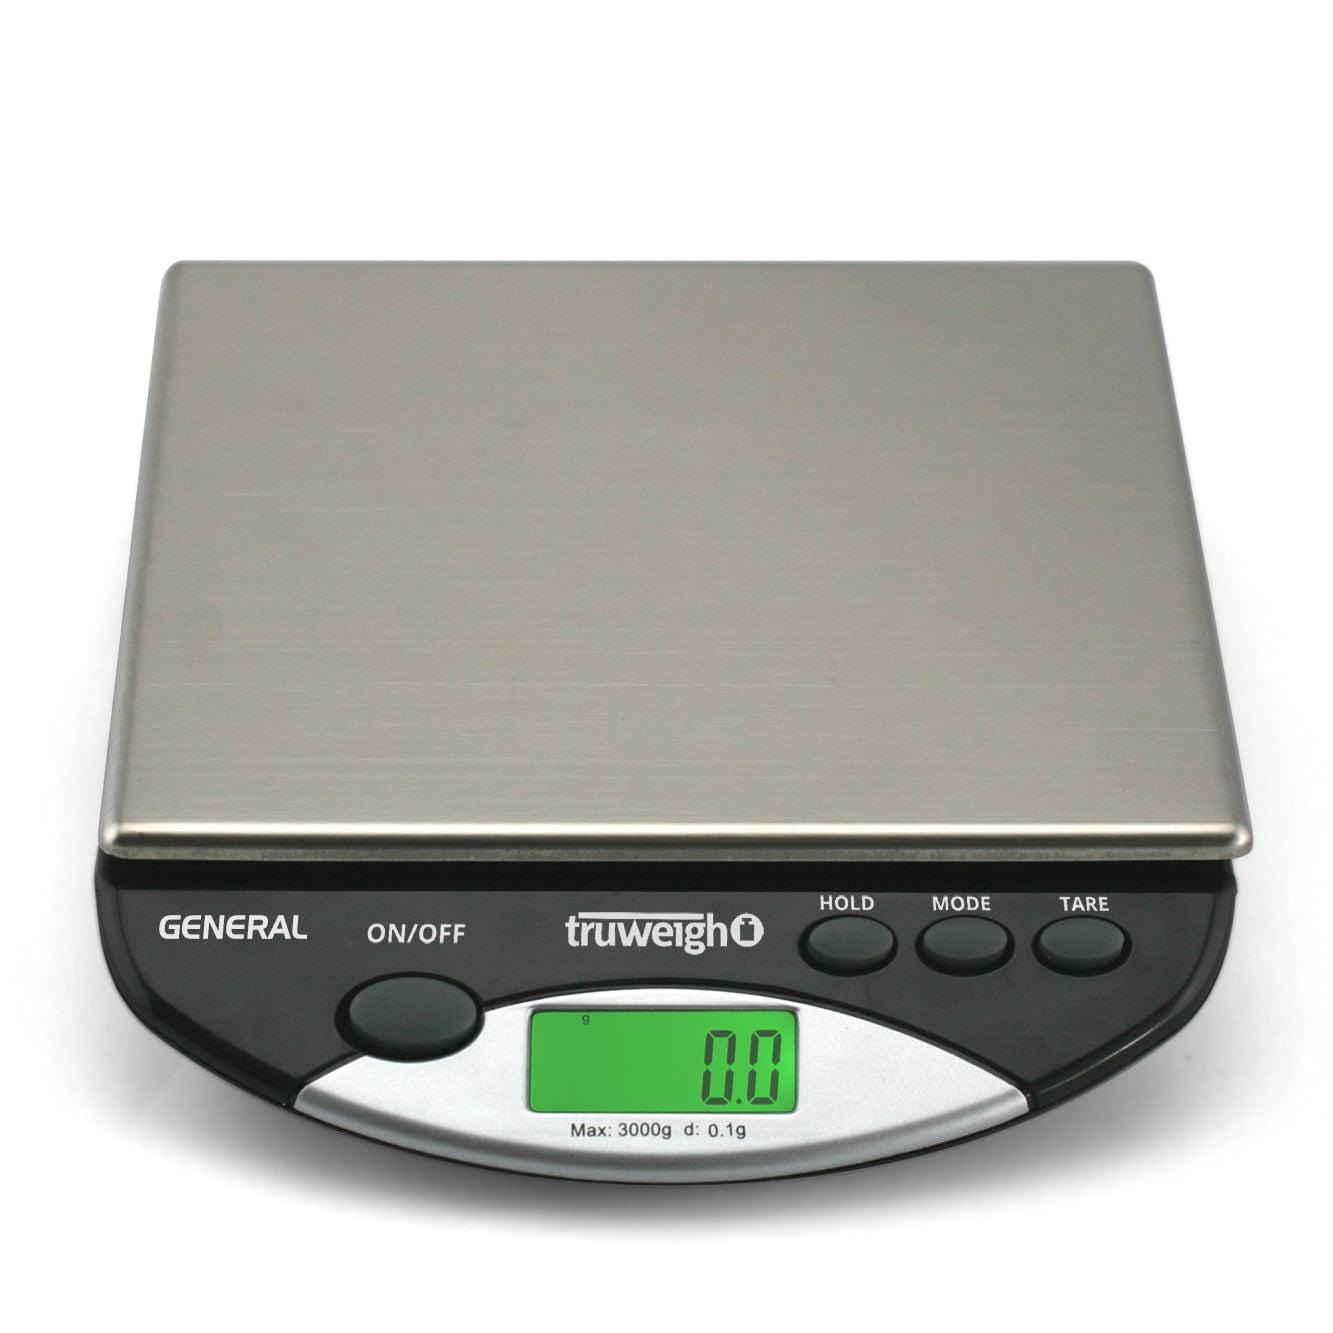 Truweigh Scales Truweigh General Compact Bench Scale